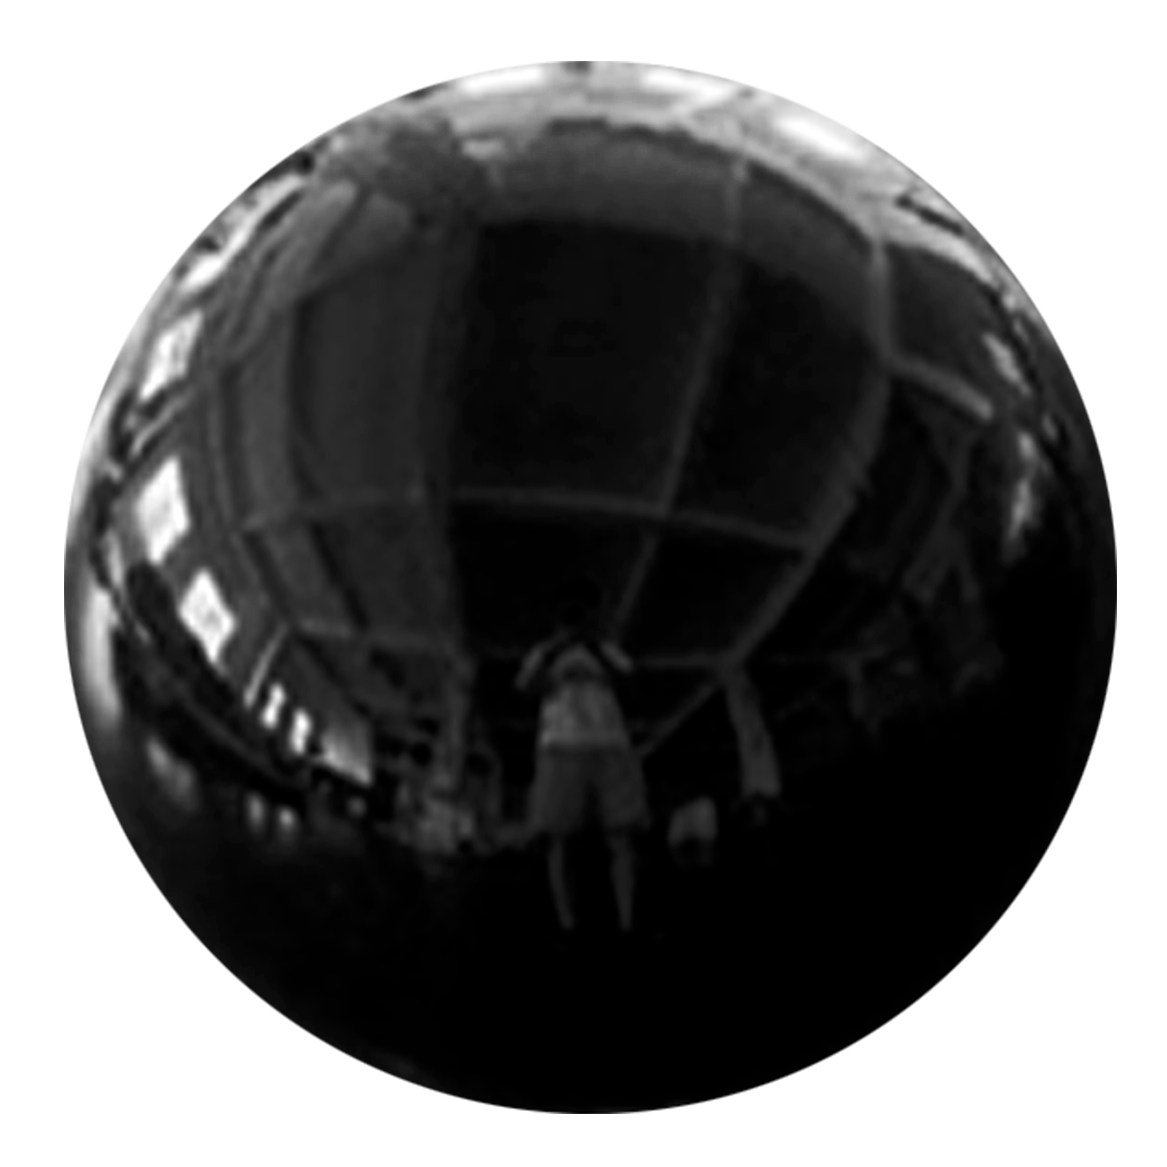 Buy Inflatable 250 centimeters Shiny Round Black Sphere